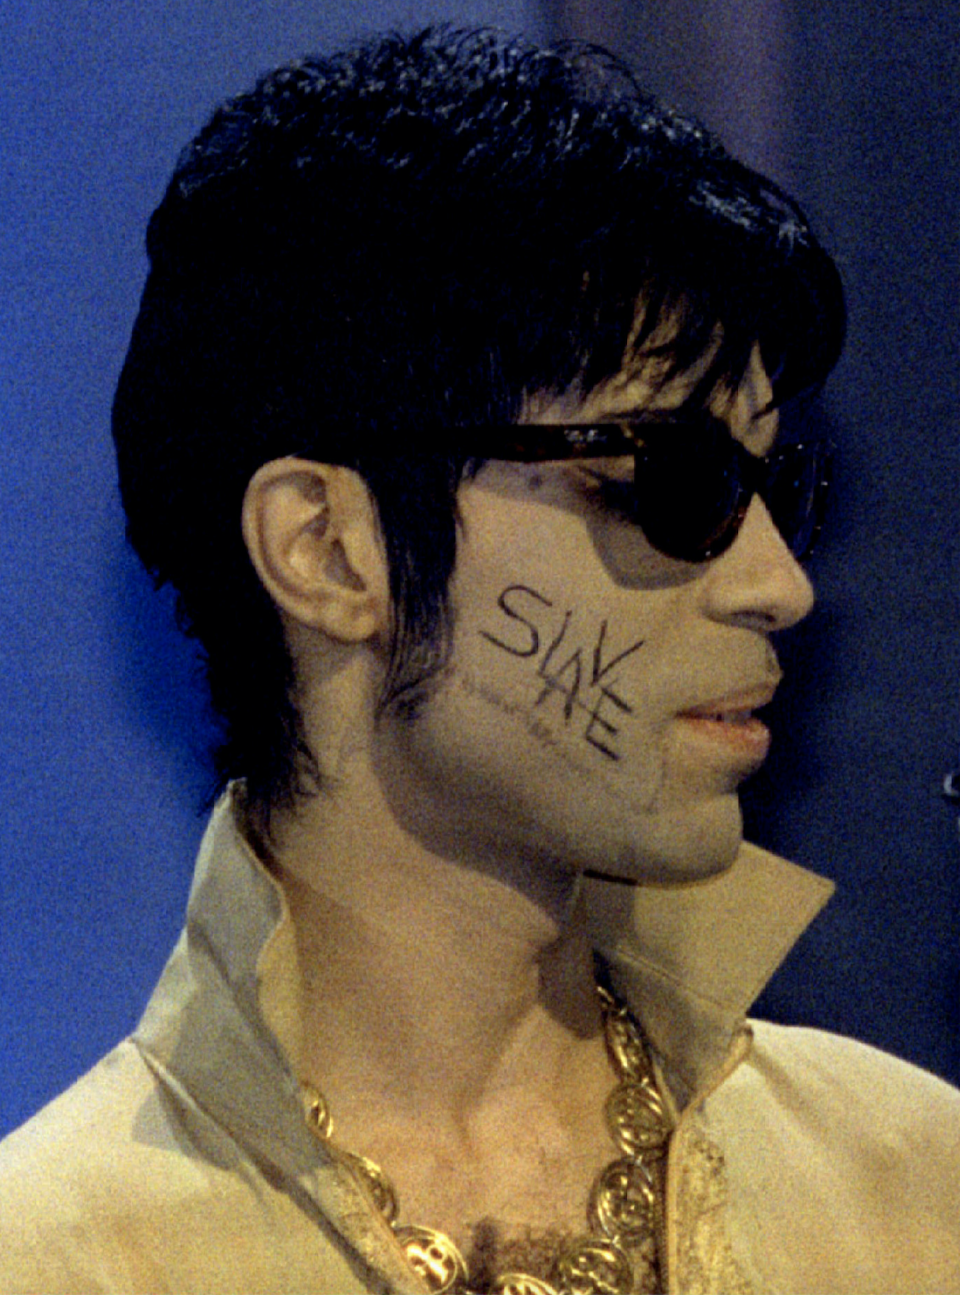 The man formerly known as Prince, with the word "Slave' written on his cheek, appears at the Brit Awards, the most prestigious event in UK pop music February 20, 1995. (Photo: Reuters)